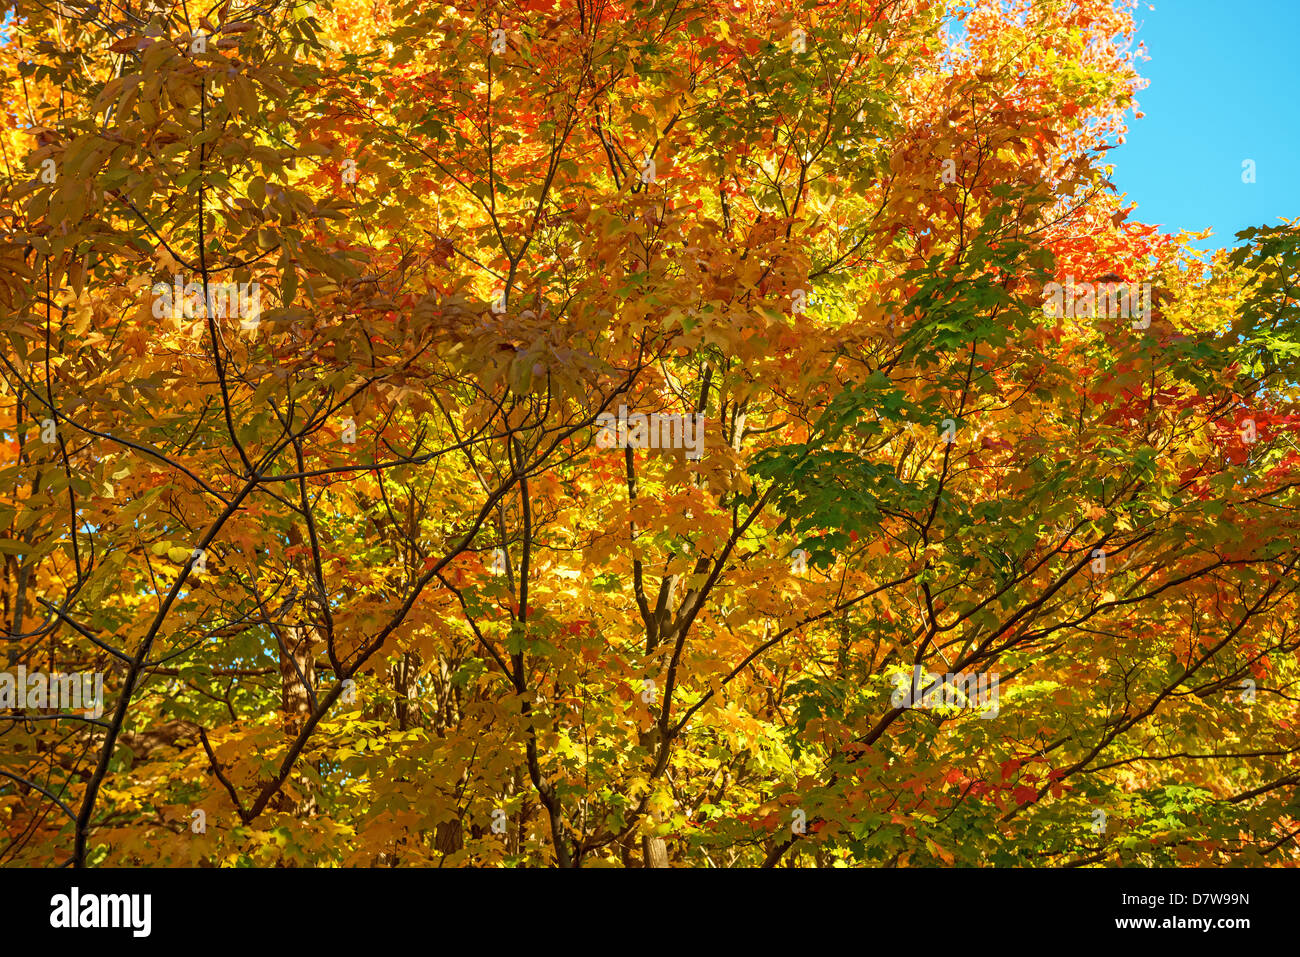 Vibrant color of Leaves on tree in the fall, Milton, Ontario, Canada Stock Photo